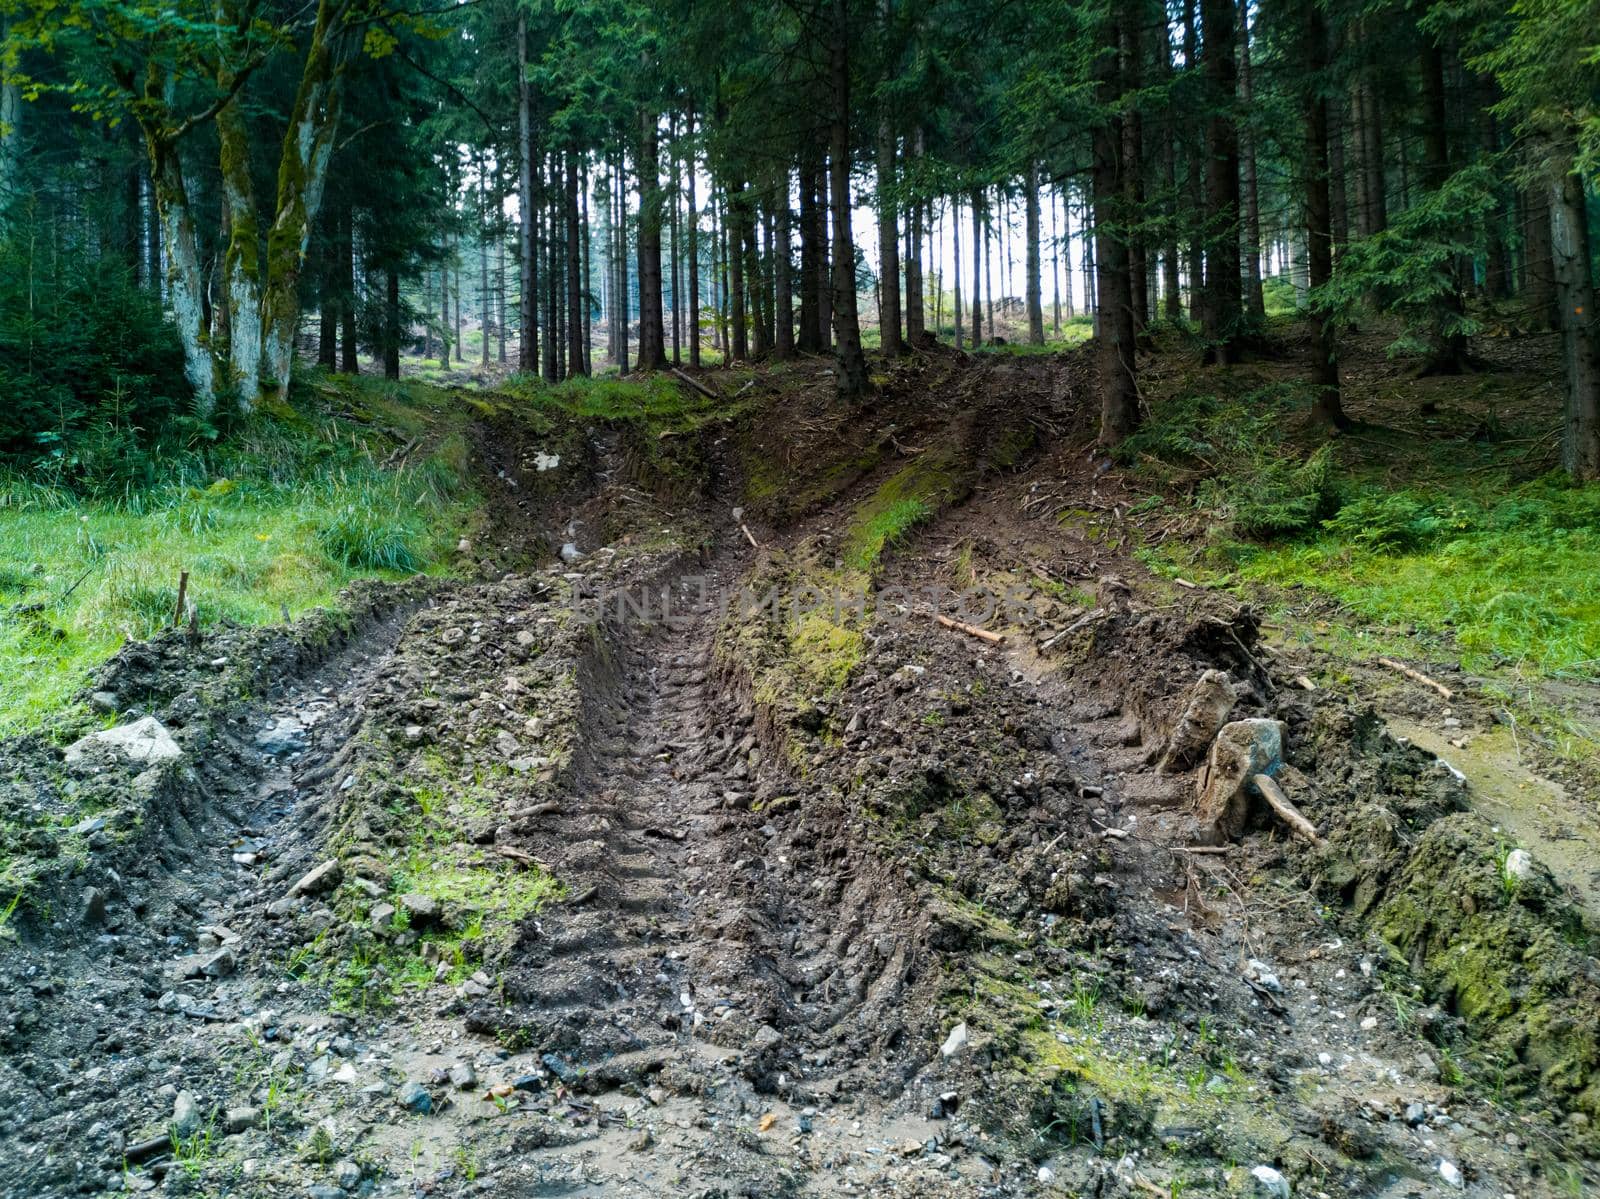 Paths next to mountain trail full of mud made by heavy vehicle by Wierzchu